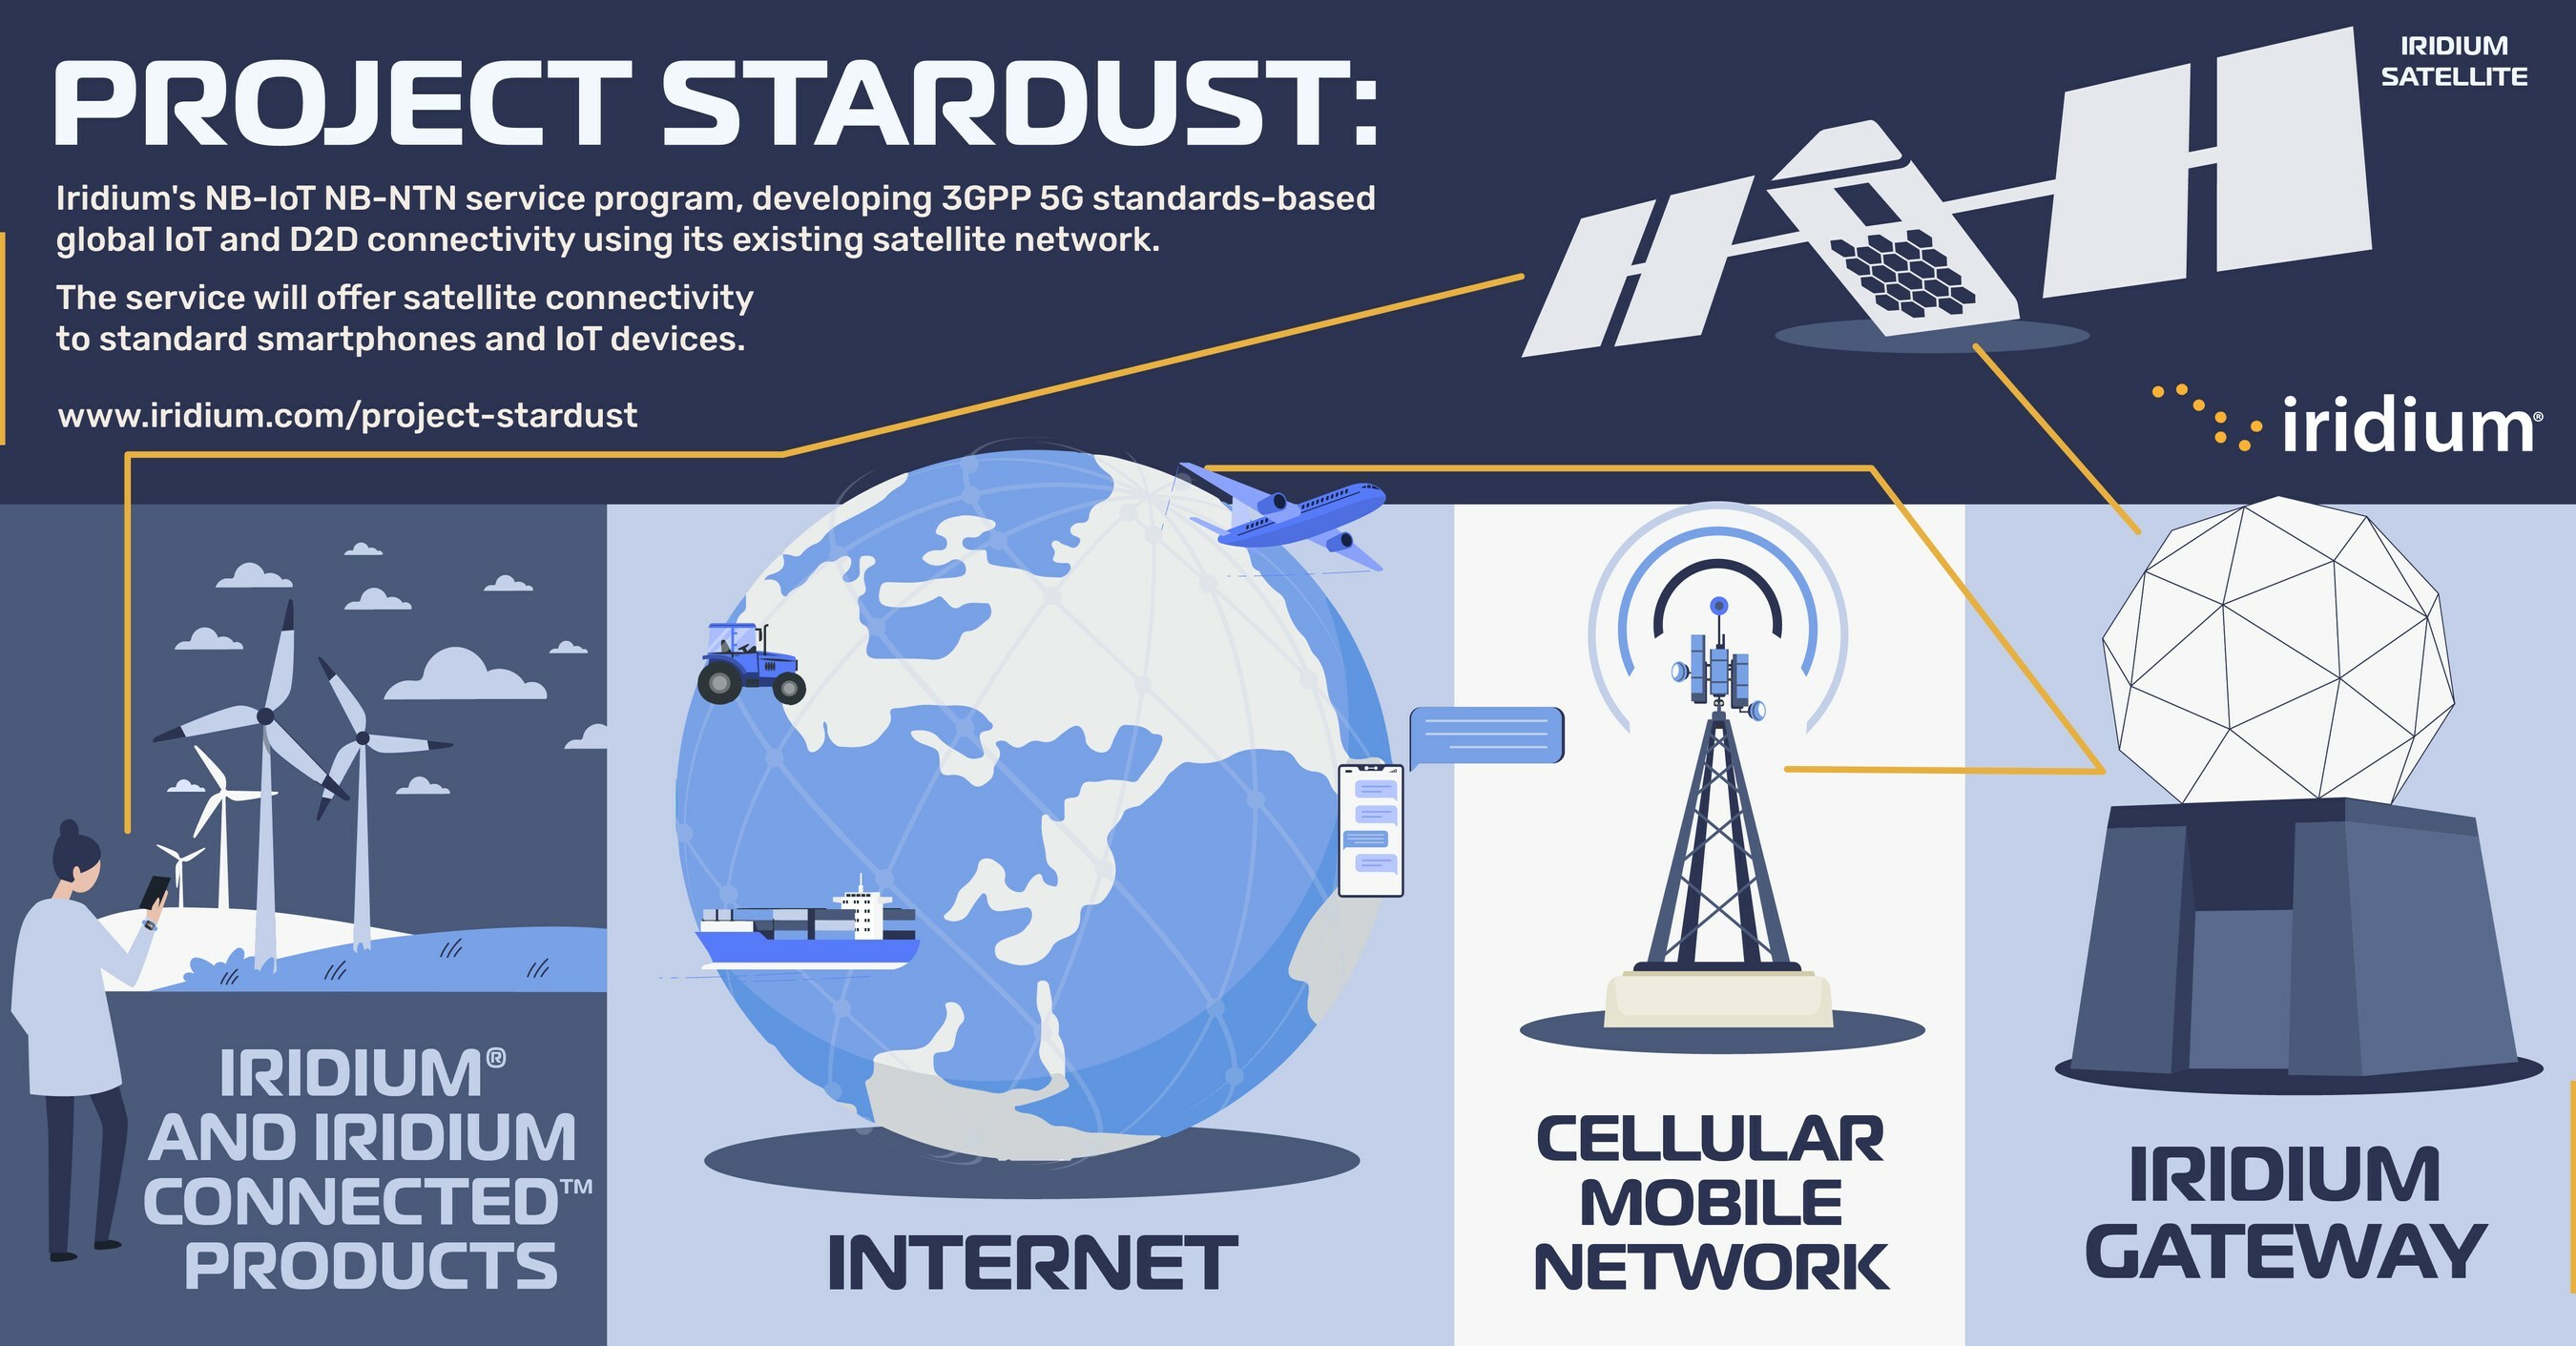 Iridium Unveils Project Stardust; Developing the Only Truly Global, Standards-Based IoT and Direct-to-Device Service